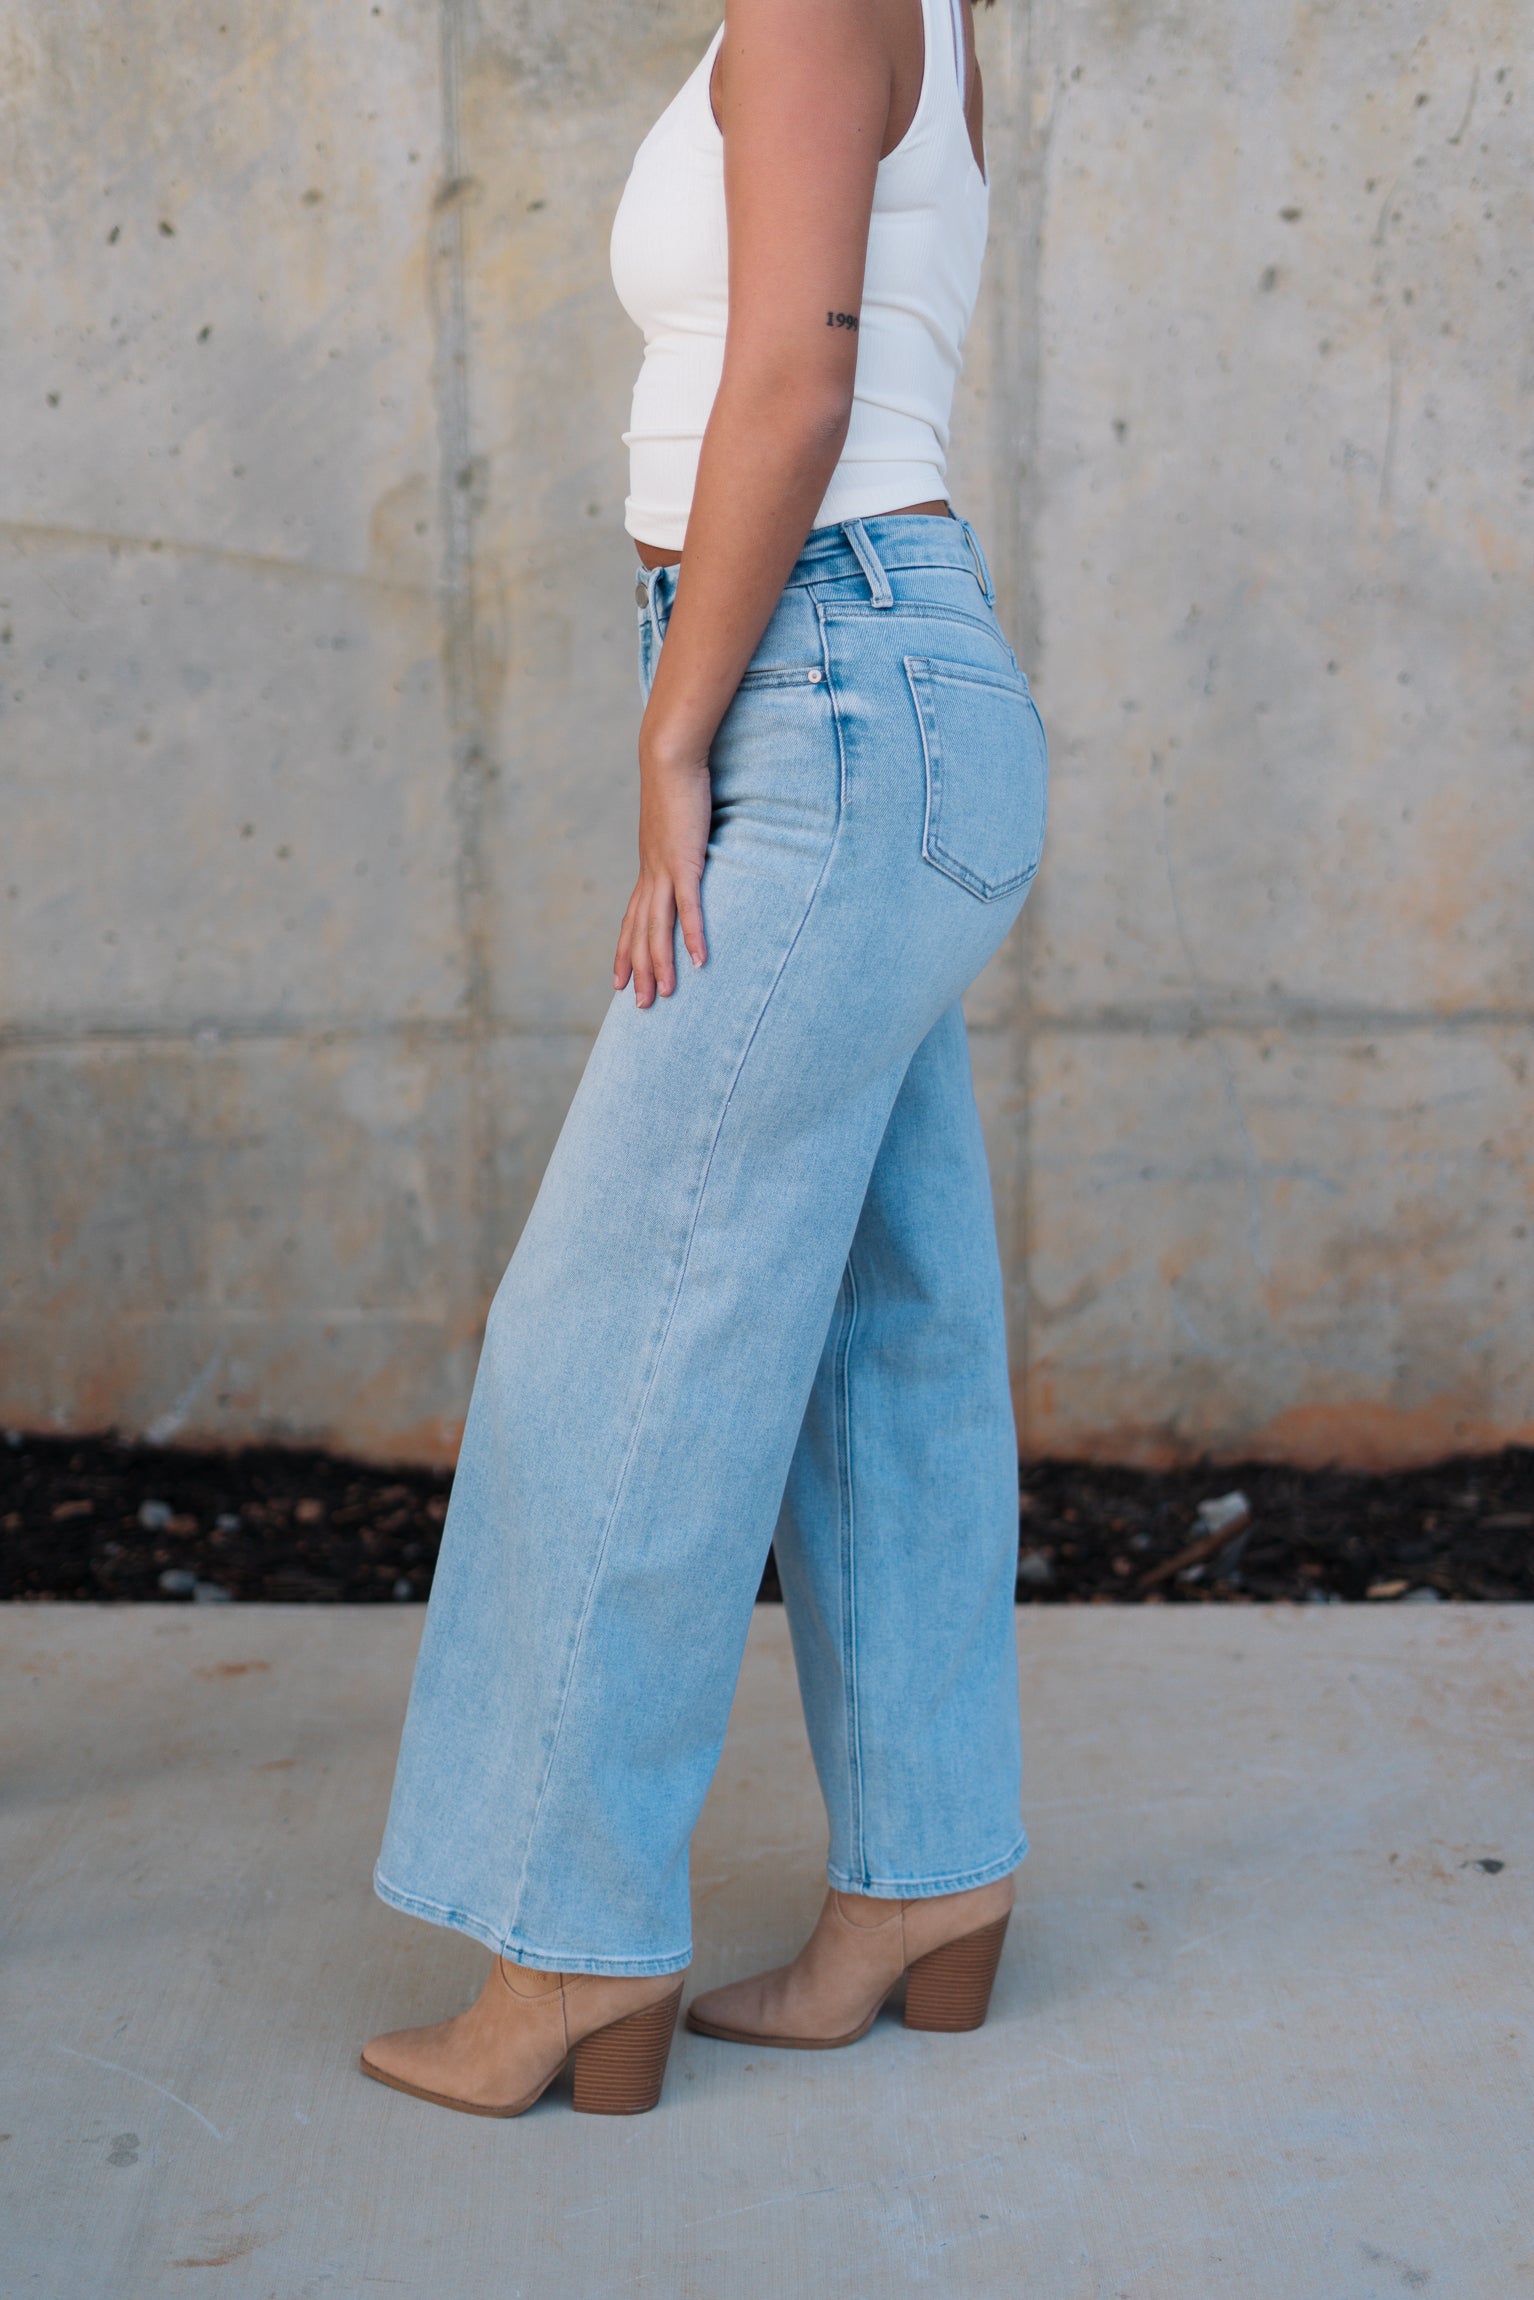 Side view of female model wearing the Kristen Light Wash Wide Leg Jeans that features wide cropped legs, light wash denim, belt loops, pockets, and a zipper/button fly. Worn with white tank top